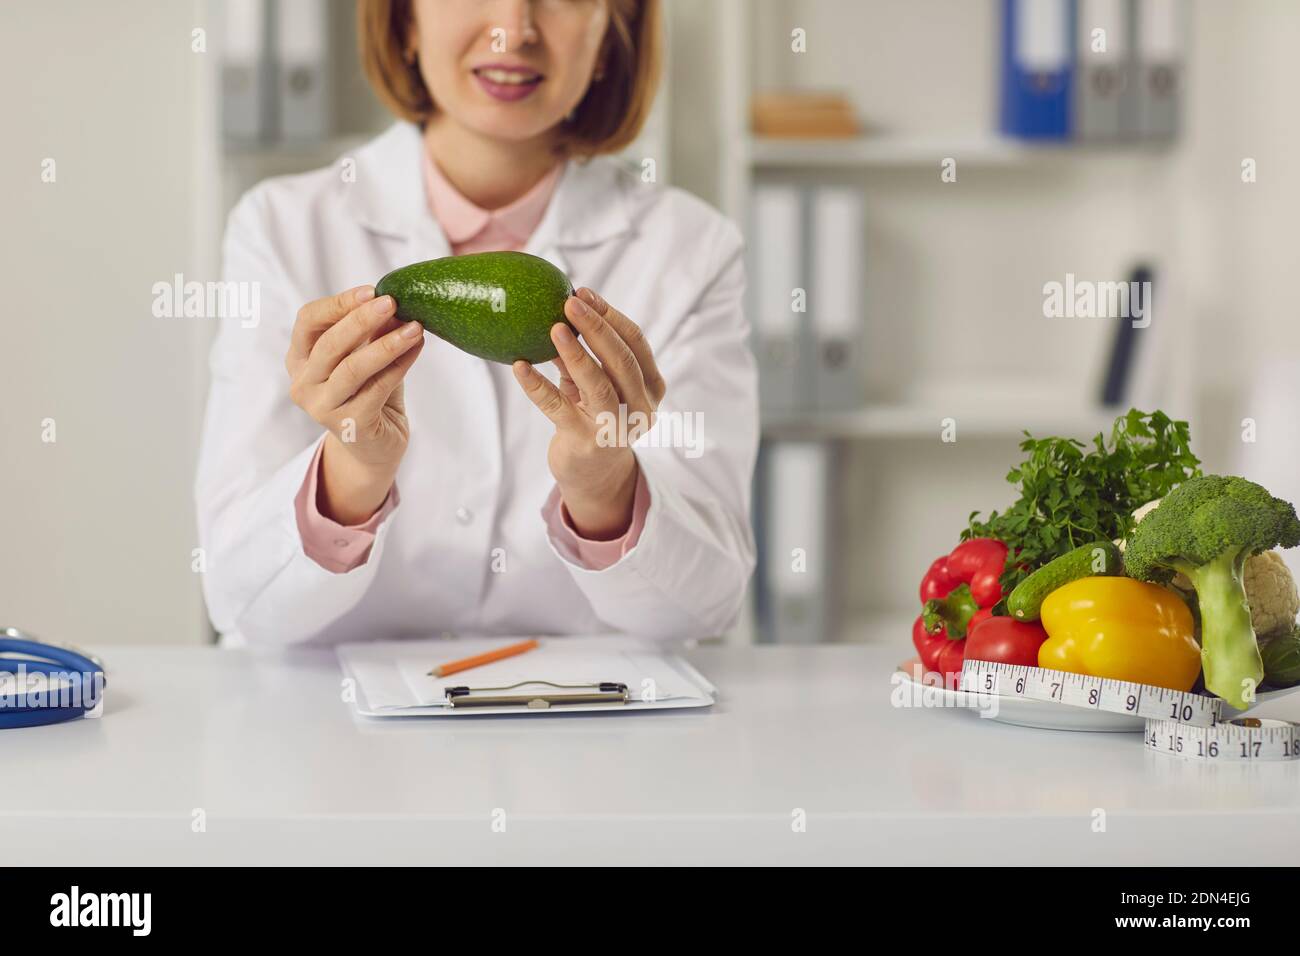 Woman doctor nutritiologist speaking about benefits of healthy fresh vegan diet for slimming online Stock Photo